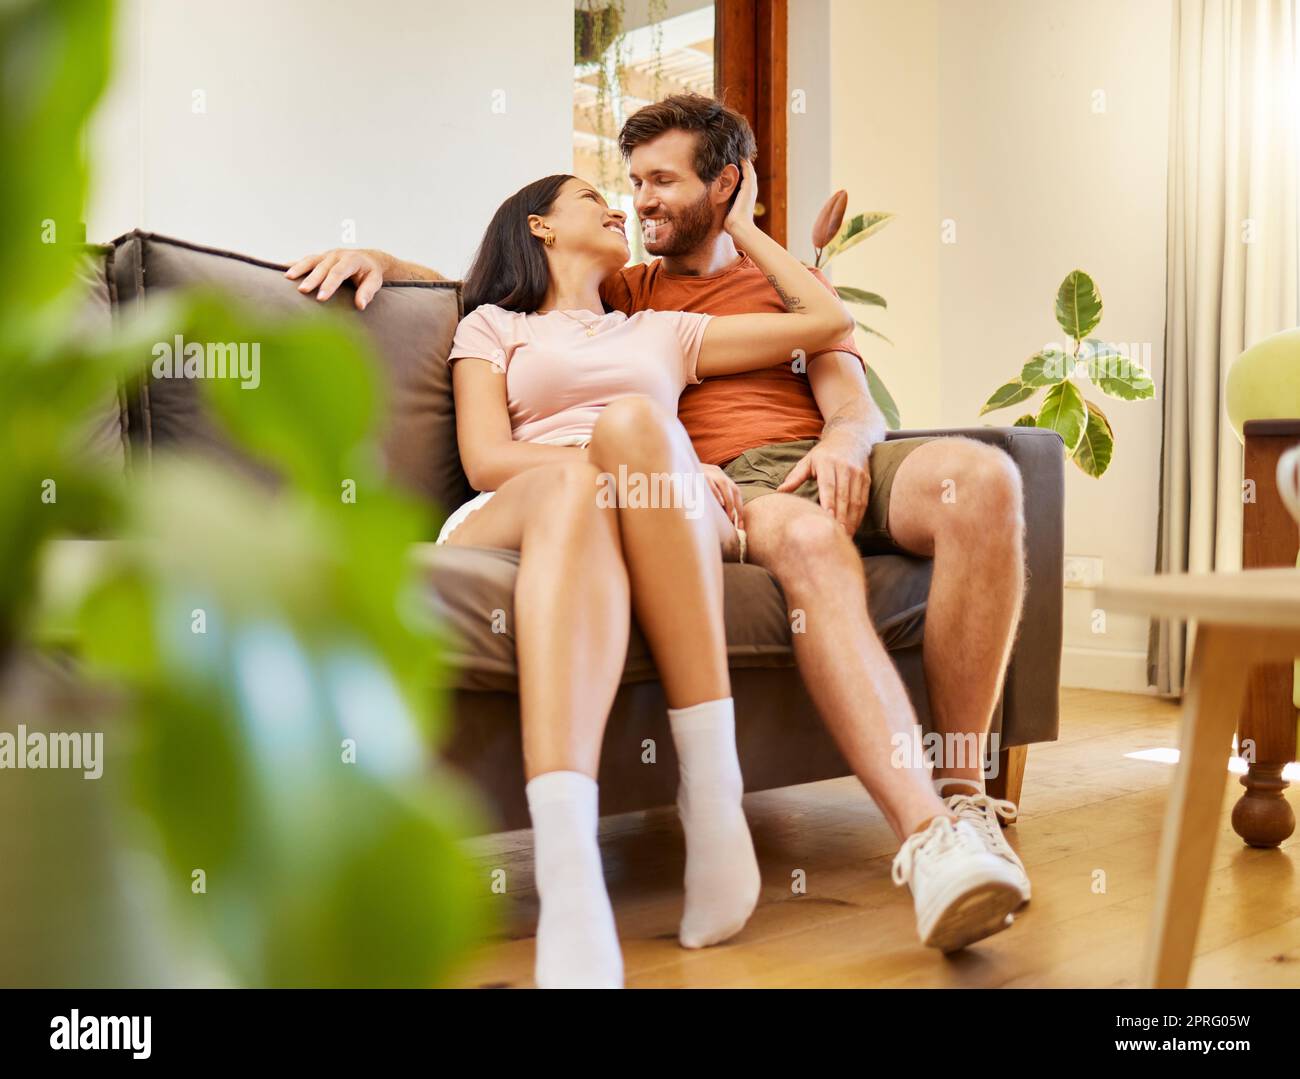 Happy, romance and couple relax indoors together, bonding and talking on sofa together. Young husband and wife sharing intimate moment, enjoying conversation, relationship and freedom at home Stock Photo